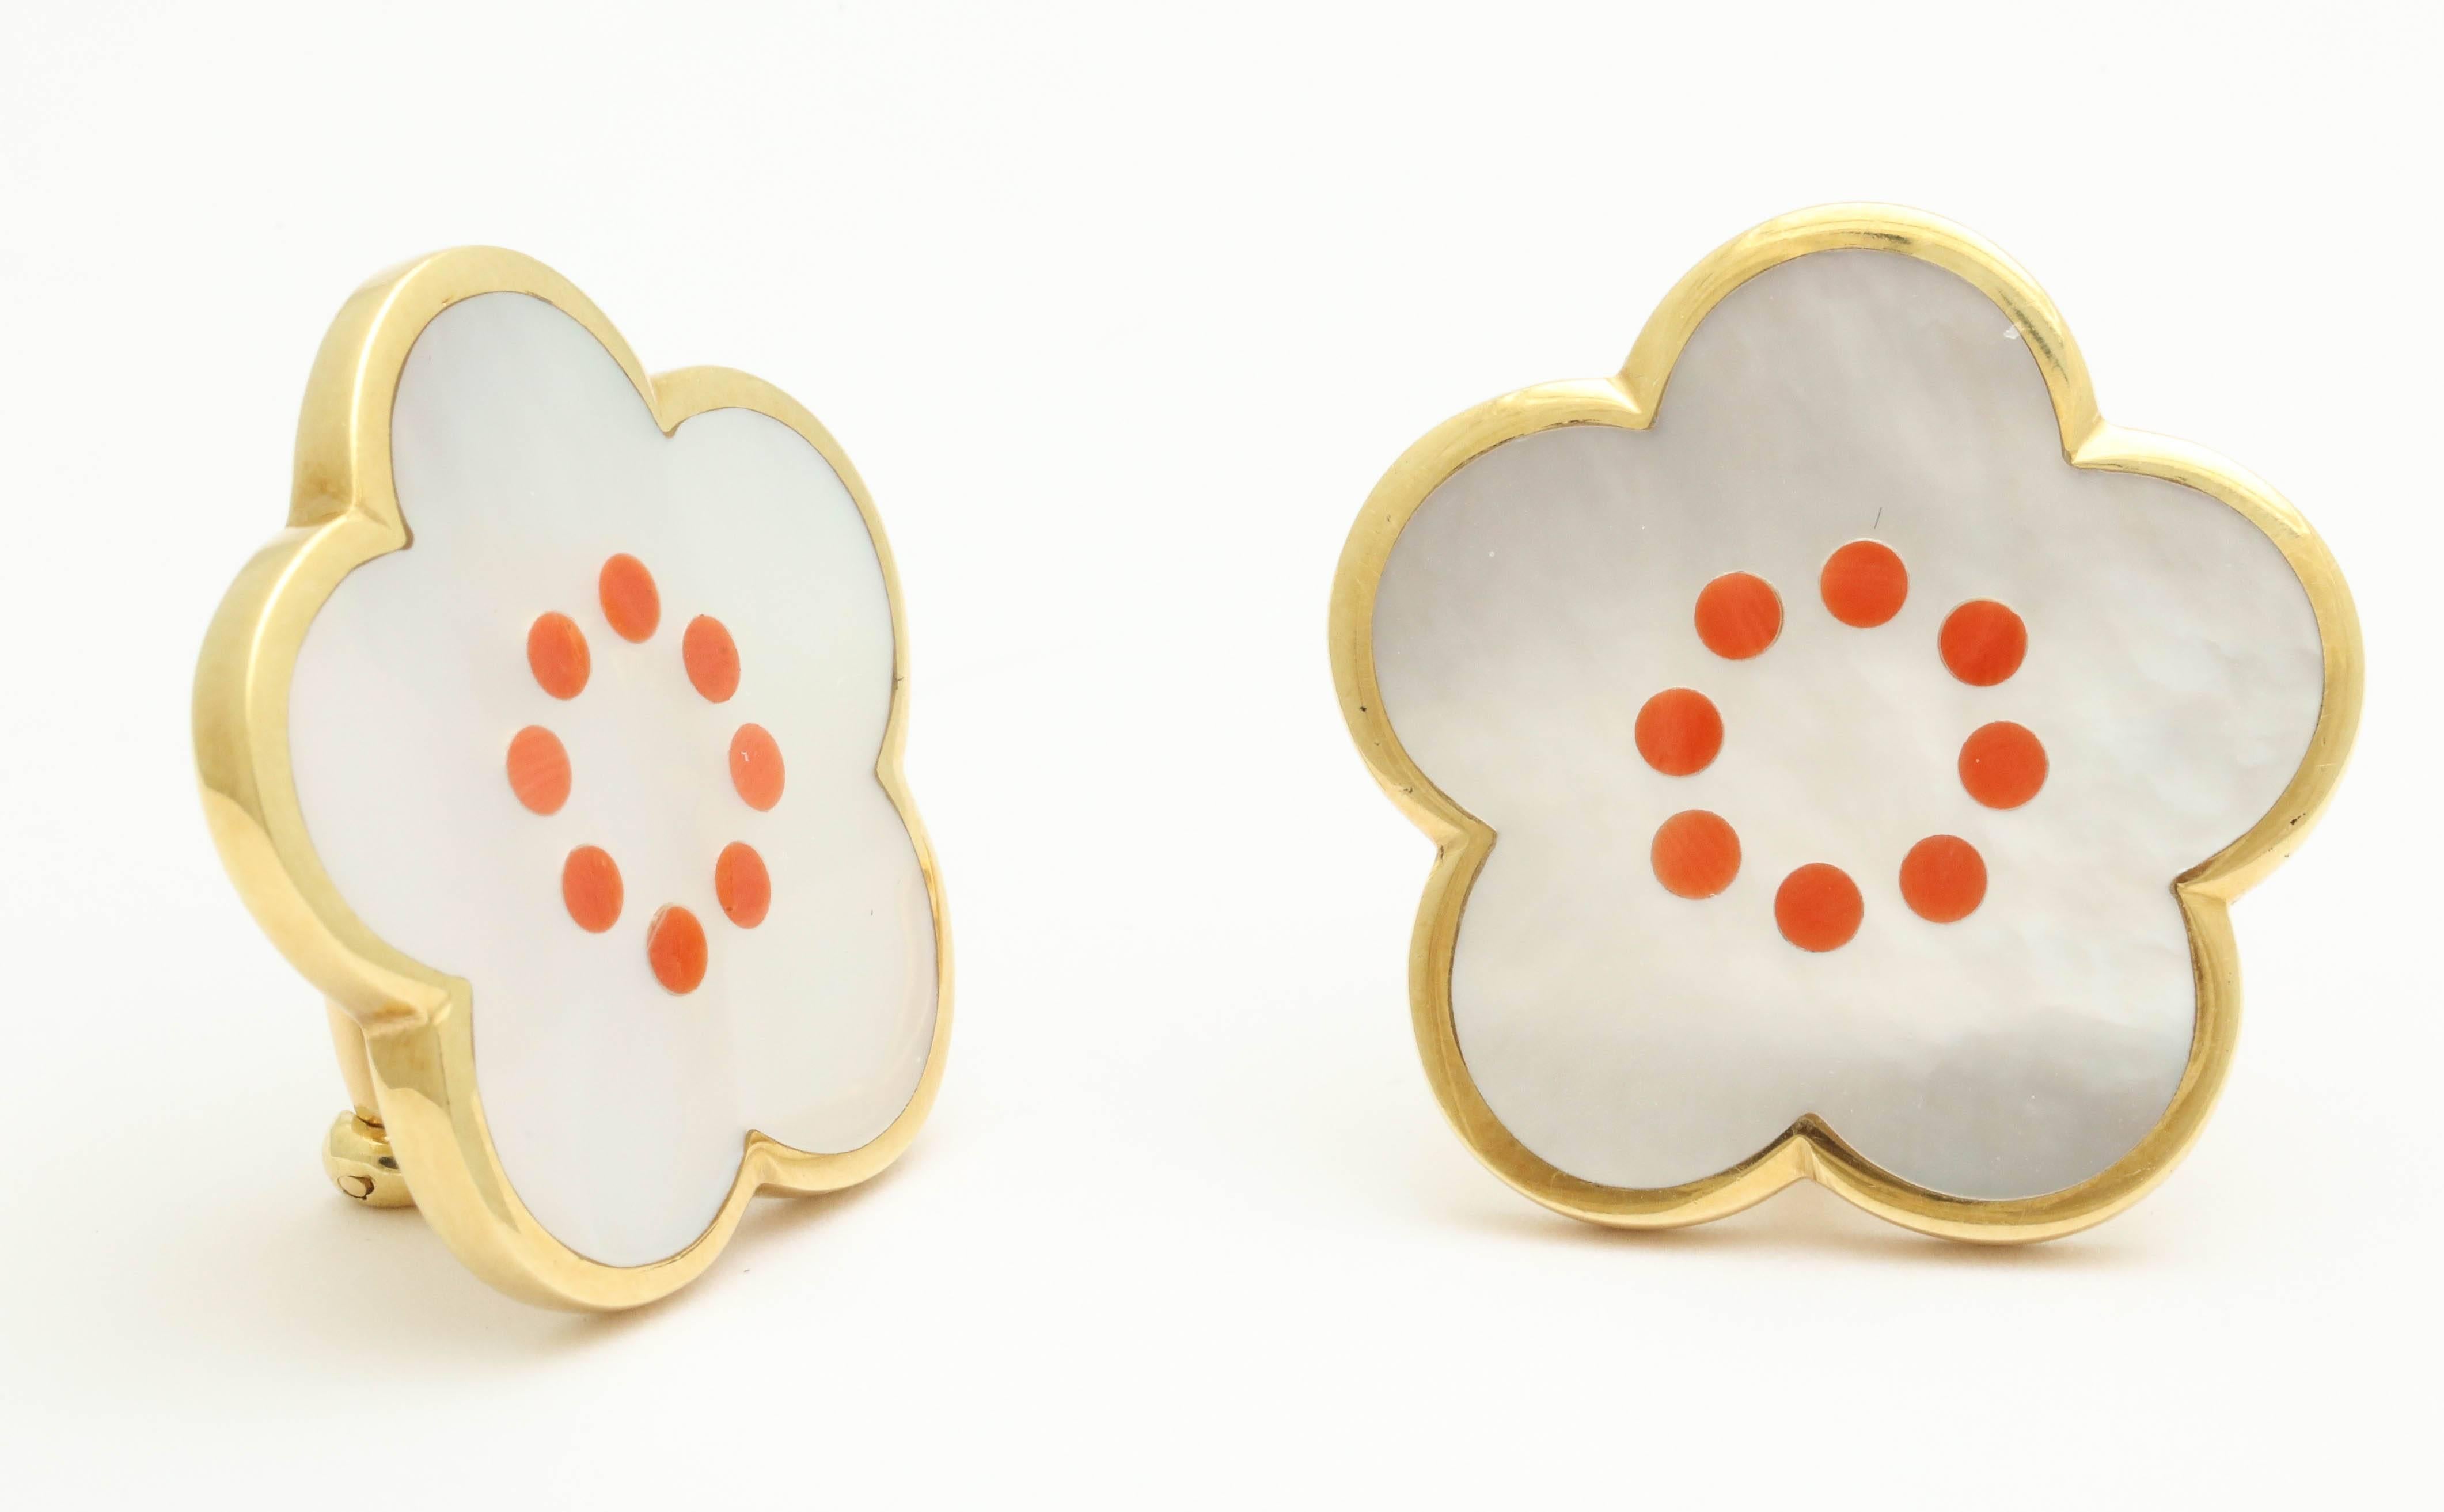 18kt Yellow Gold Flower Earclips Designed With 2  Floral Cut Inlaid Mother Of Pearl Stones And 16 Circular Cut Inlaid Coral Stones. Clip-On Backs NOTE: Posts May Be Added For Pierced Ears. Created By Tiffany & Co. In the 1980's.